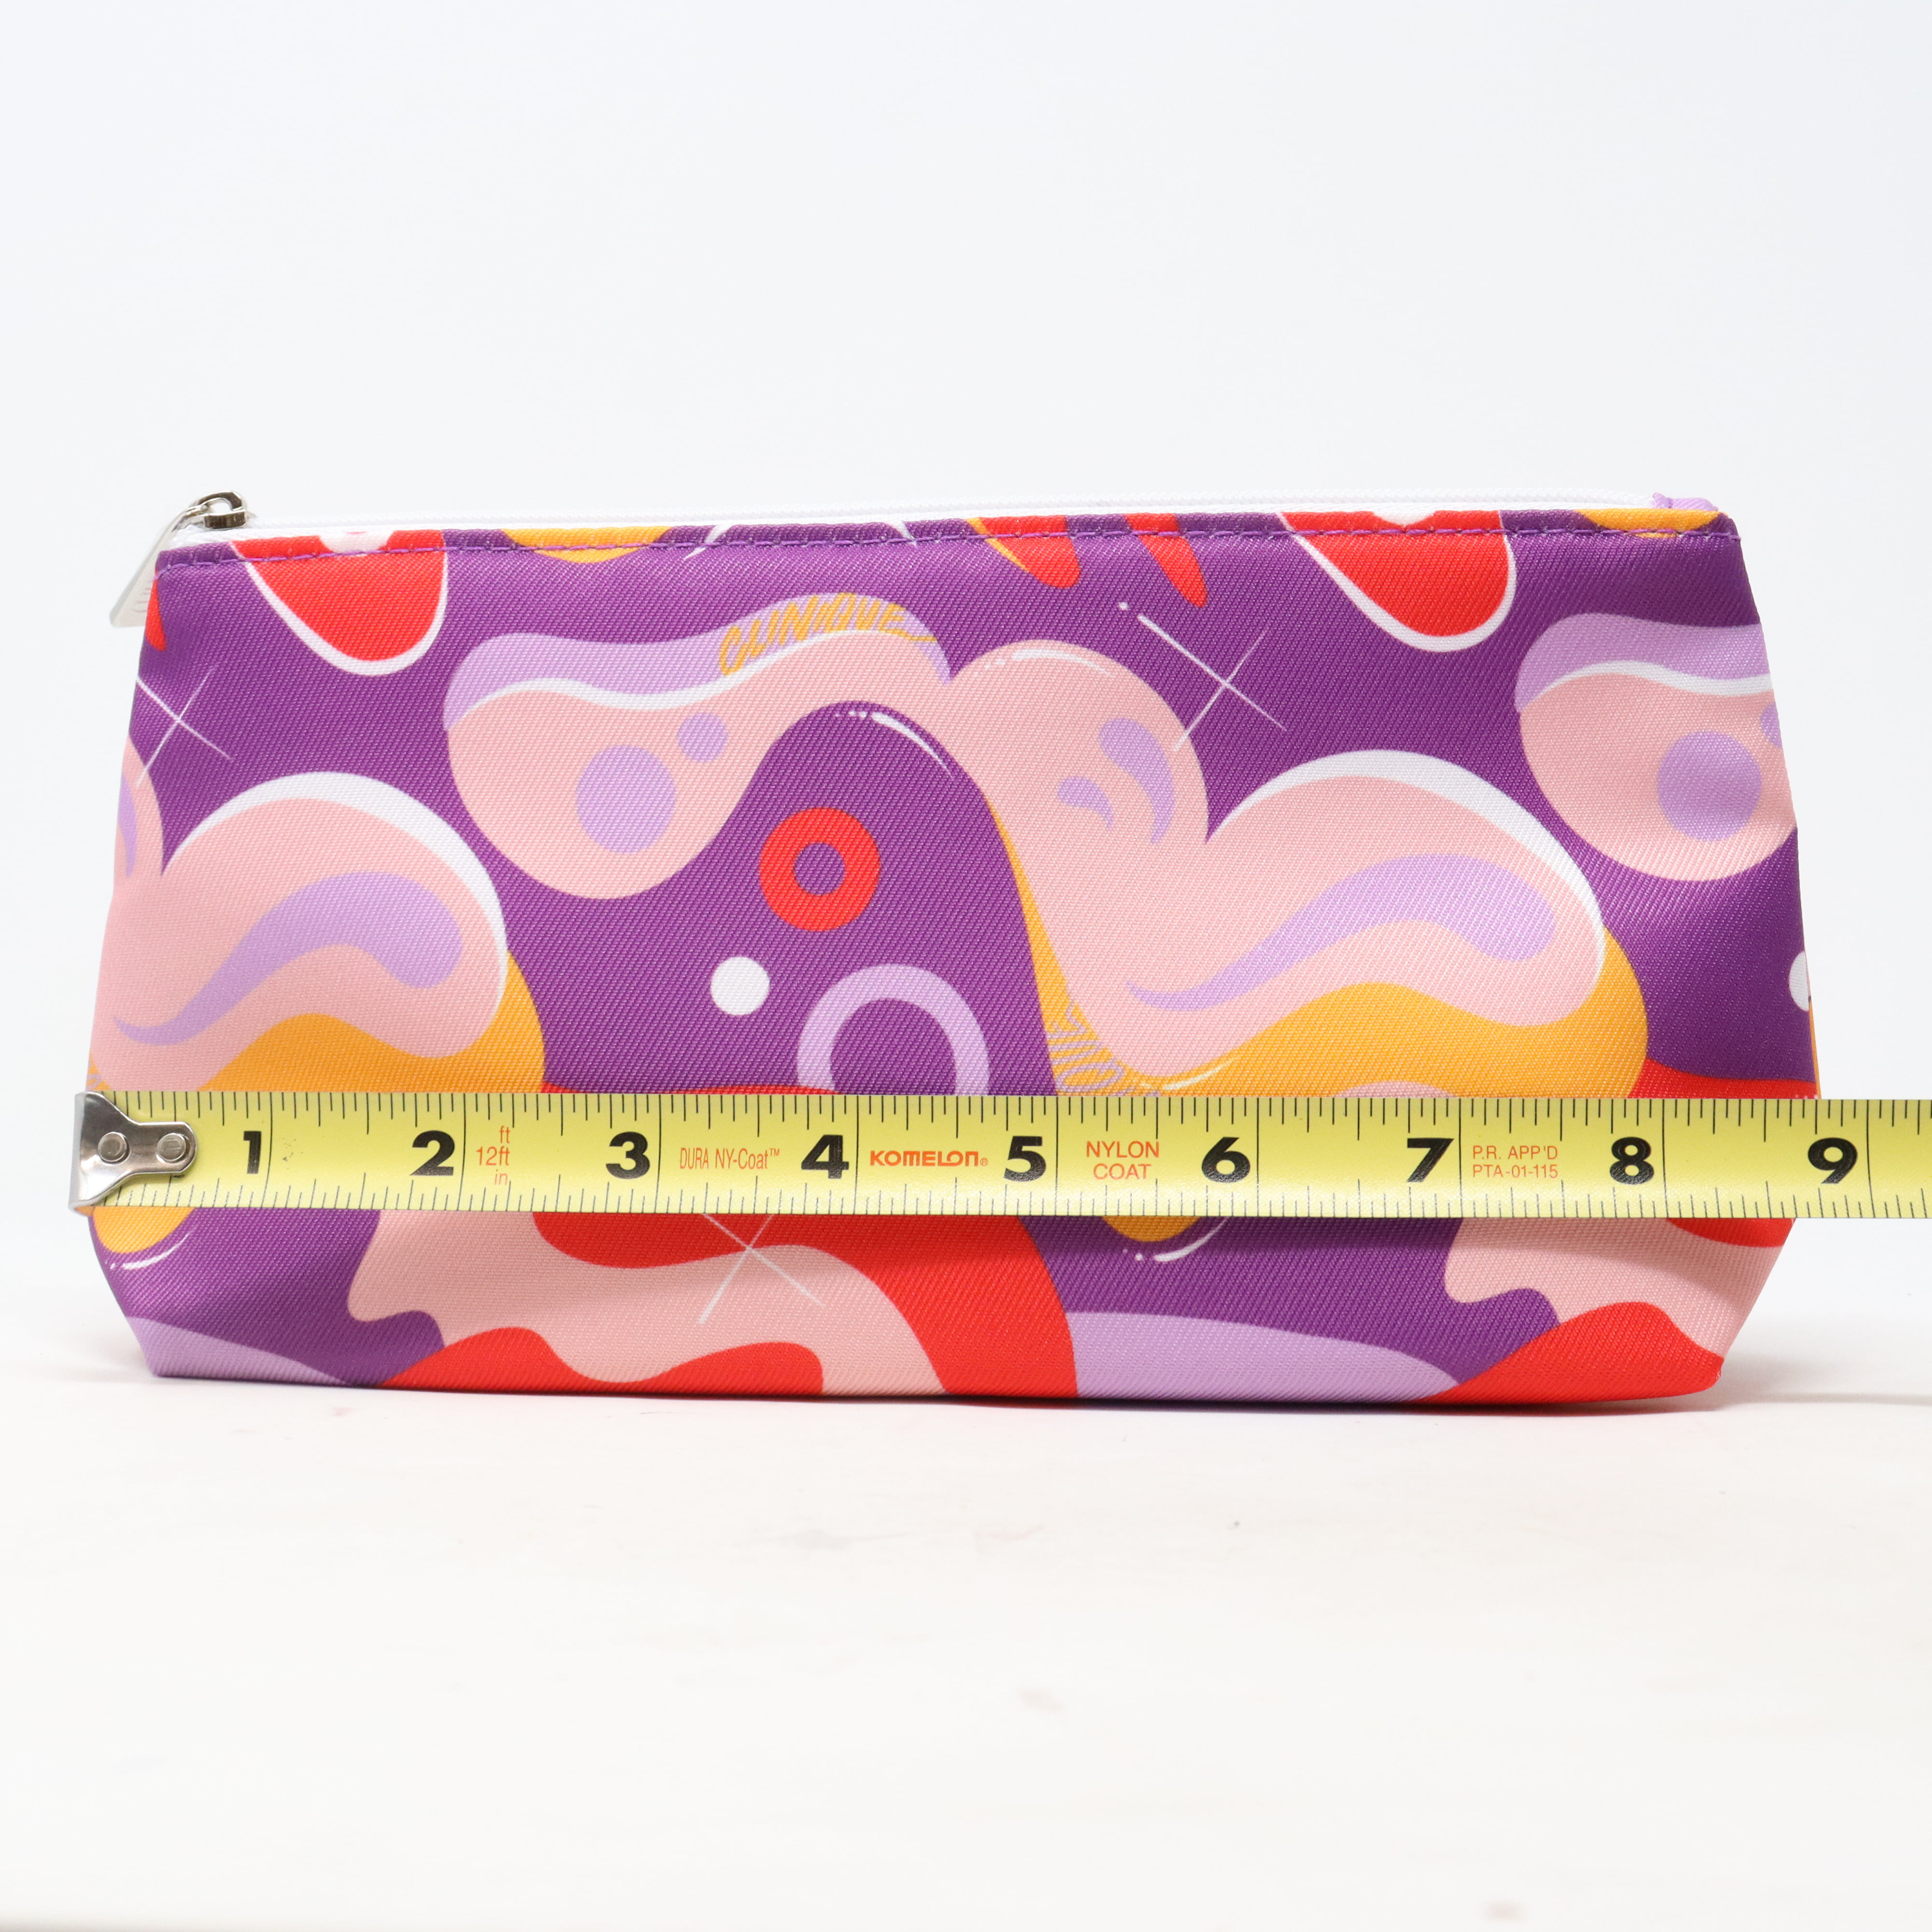 Clinique Designer Cosmetic/Makeup Bag/Zipped Pouch Sizes and Colors Vary